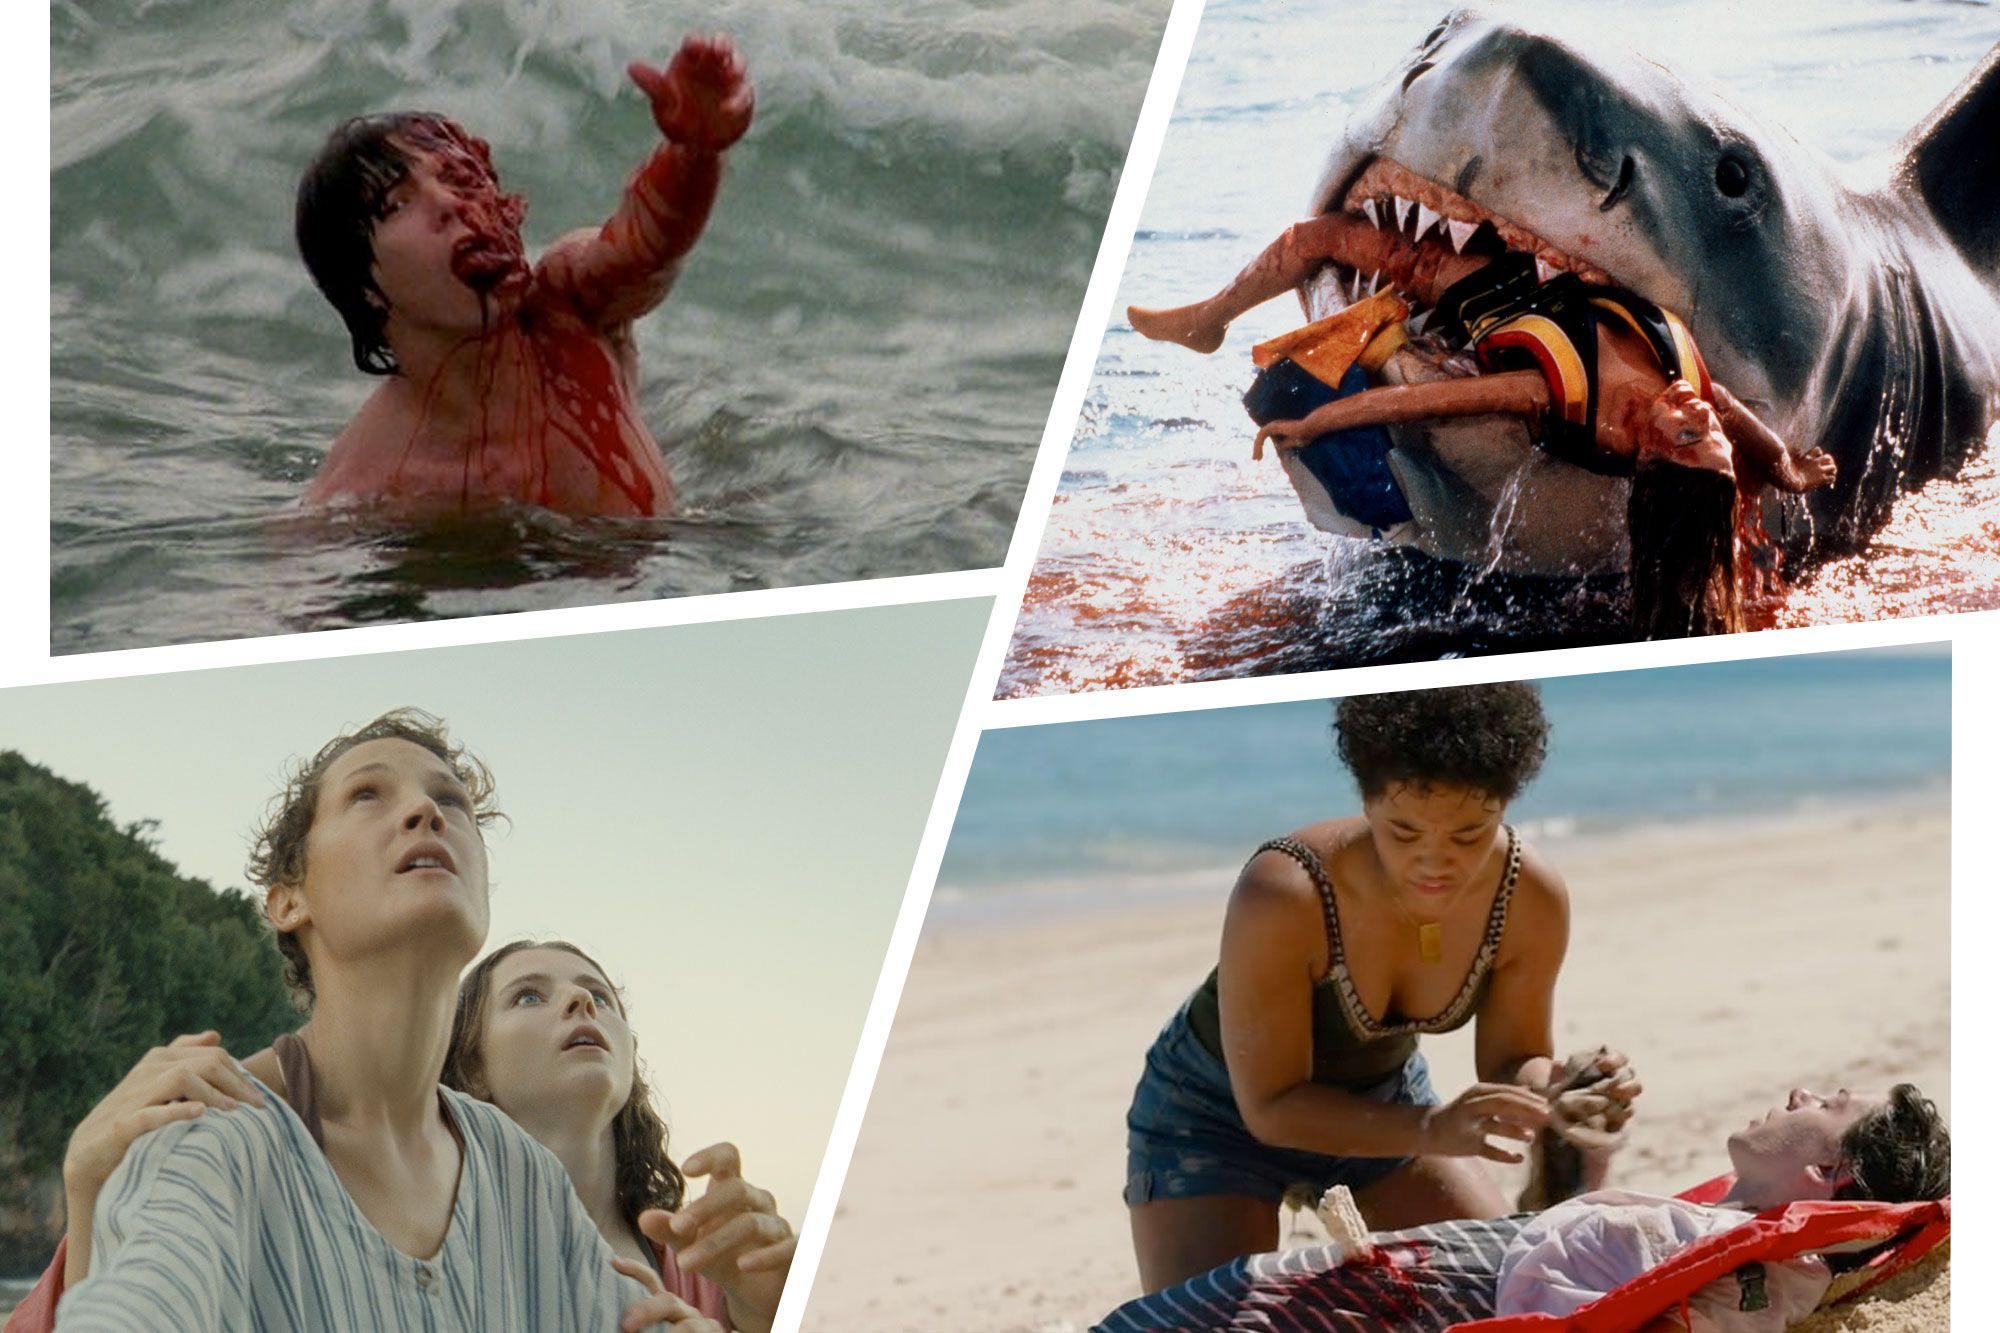 The Best Seaside Horror Movies to Watch This Summer